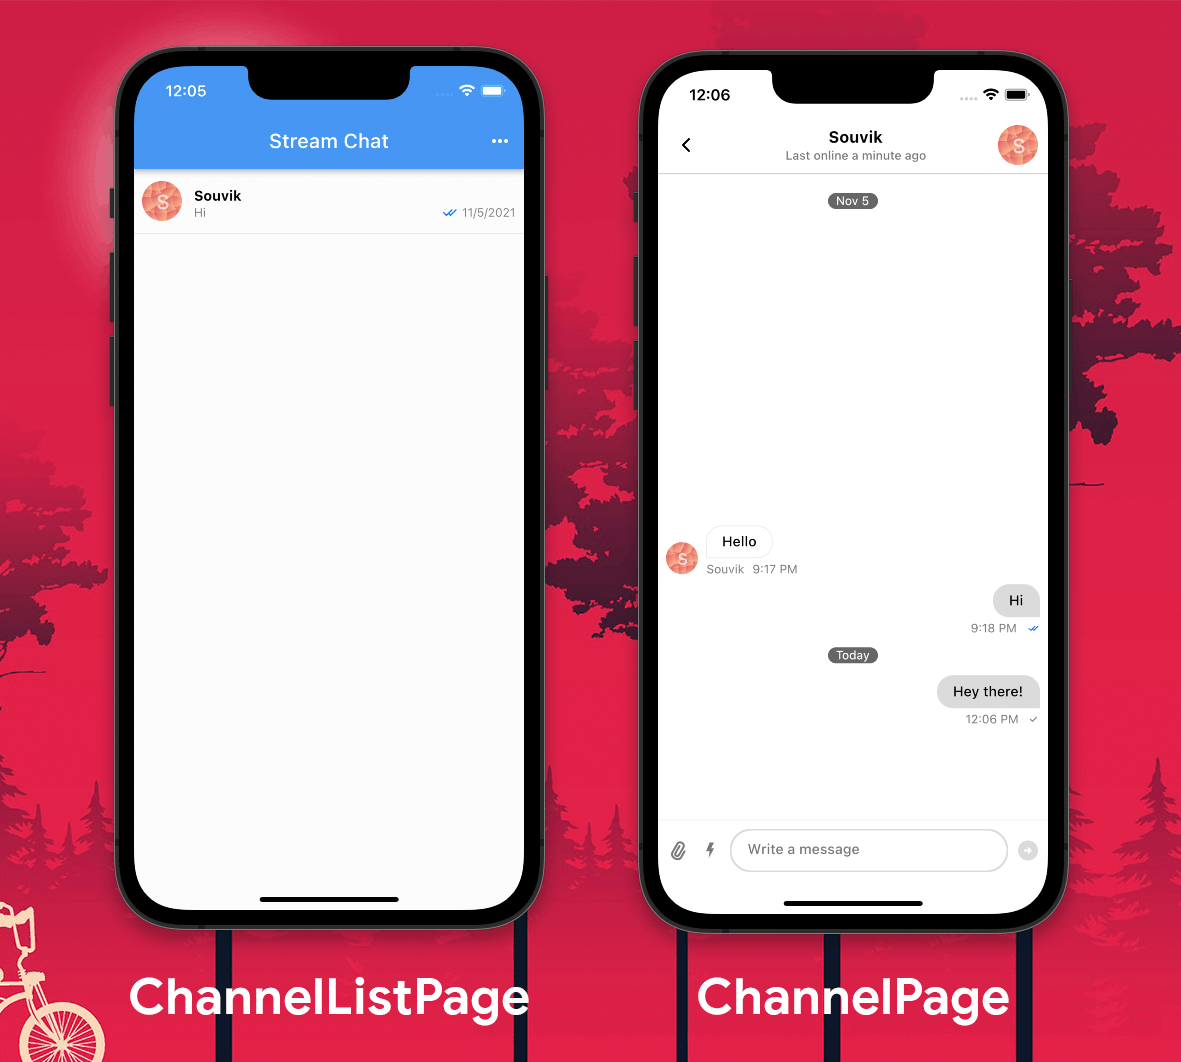 Stream channels pages for ChannelList and ChannelPage